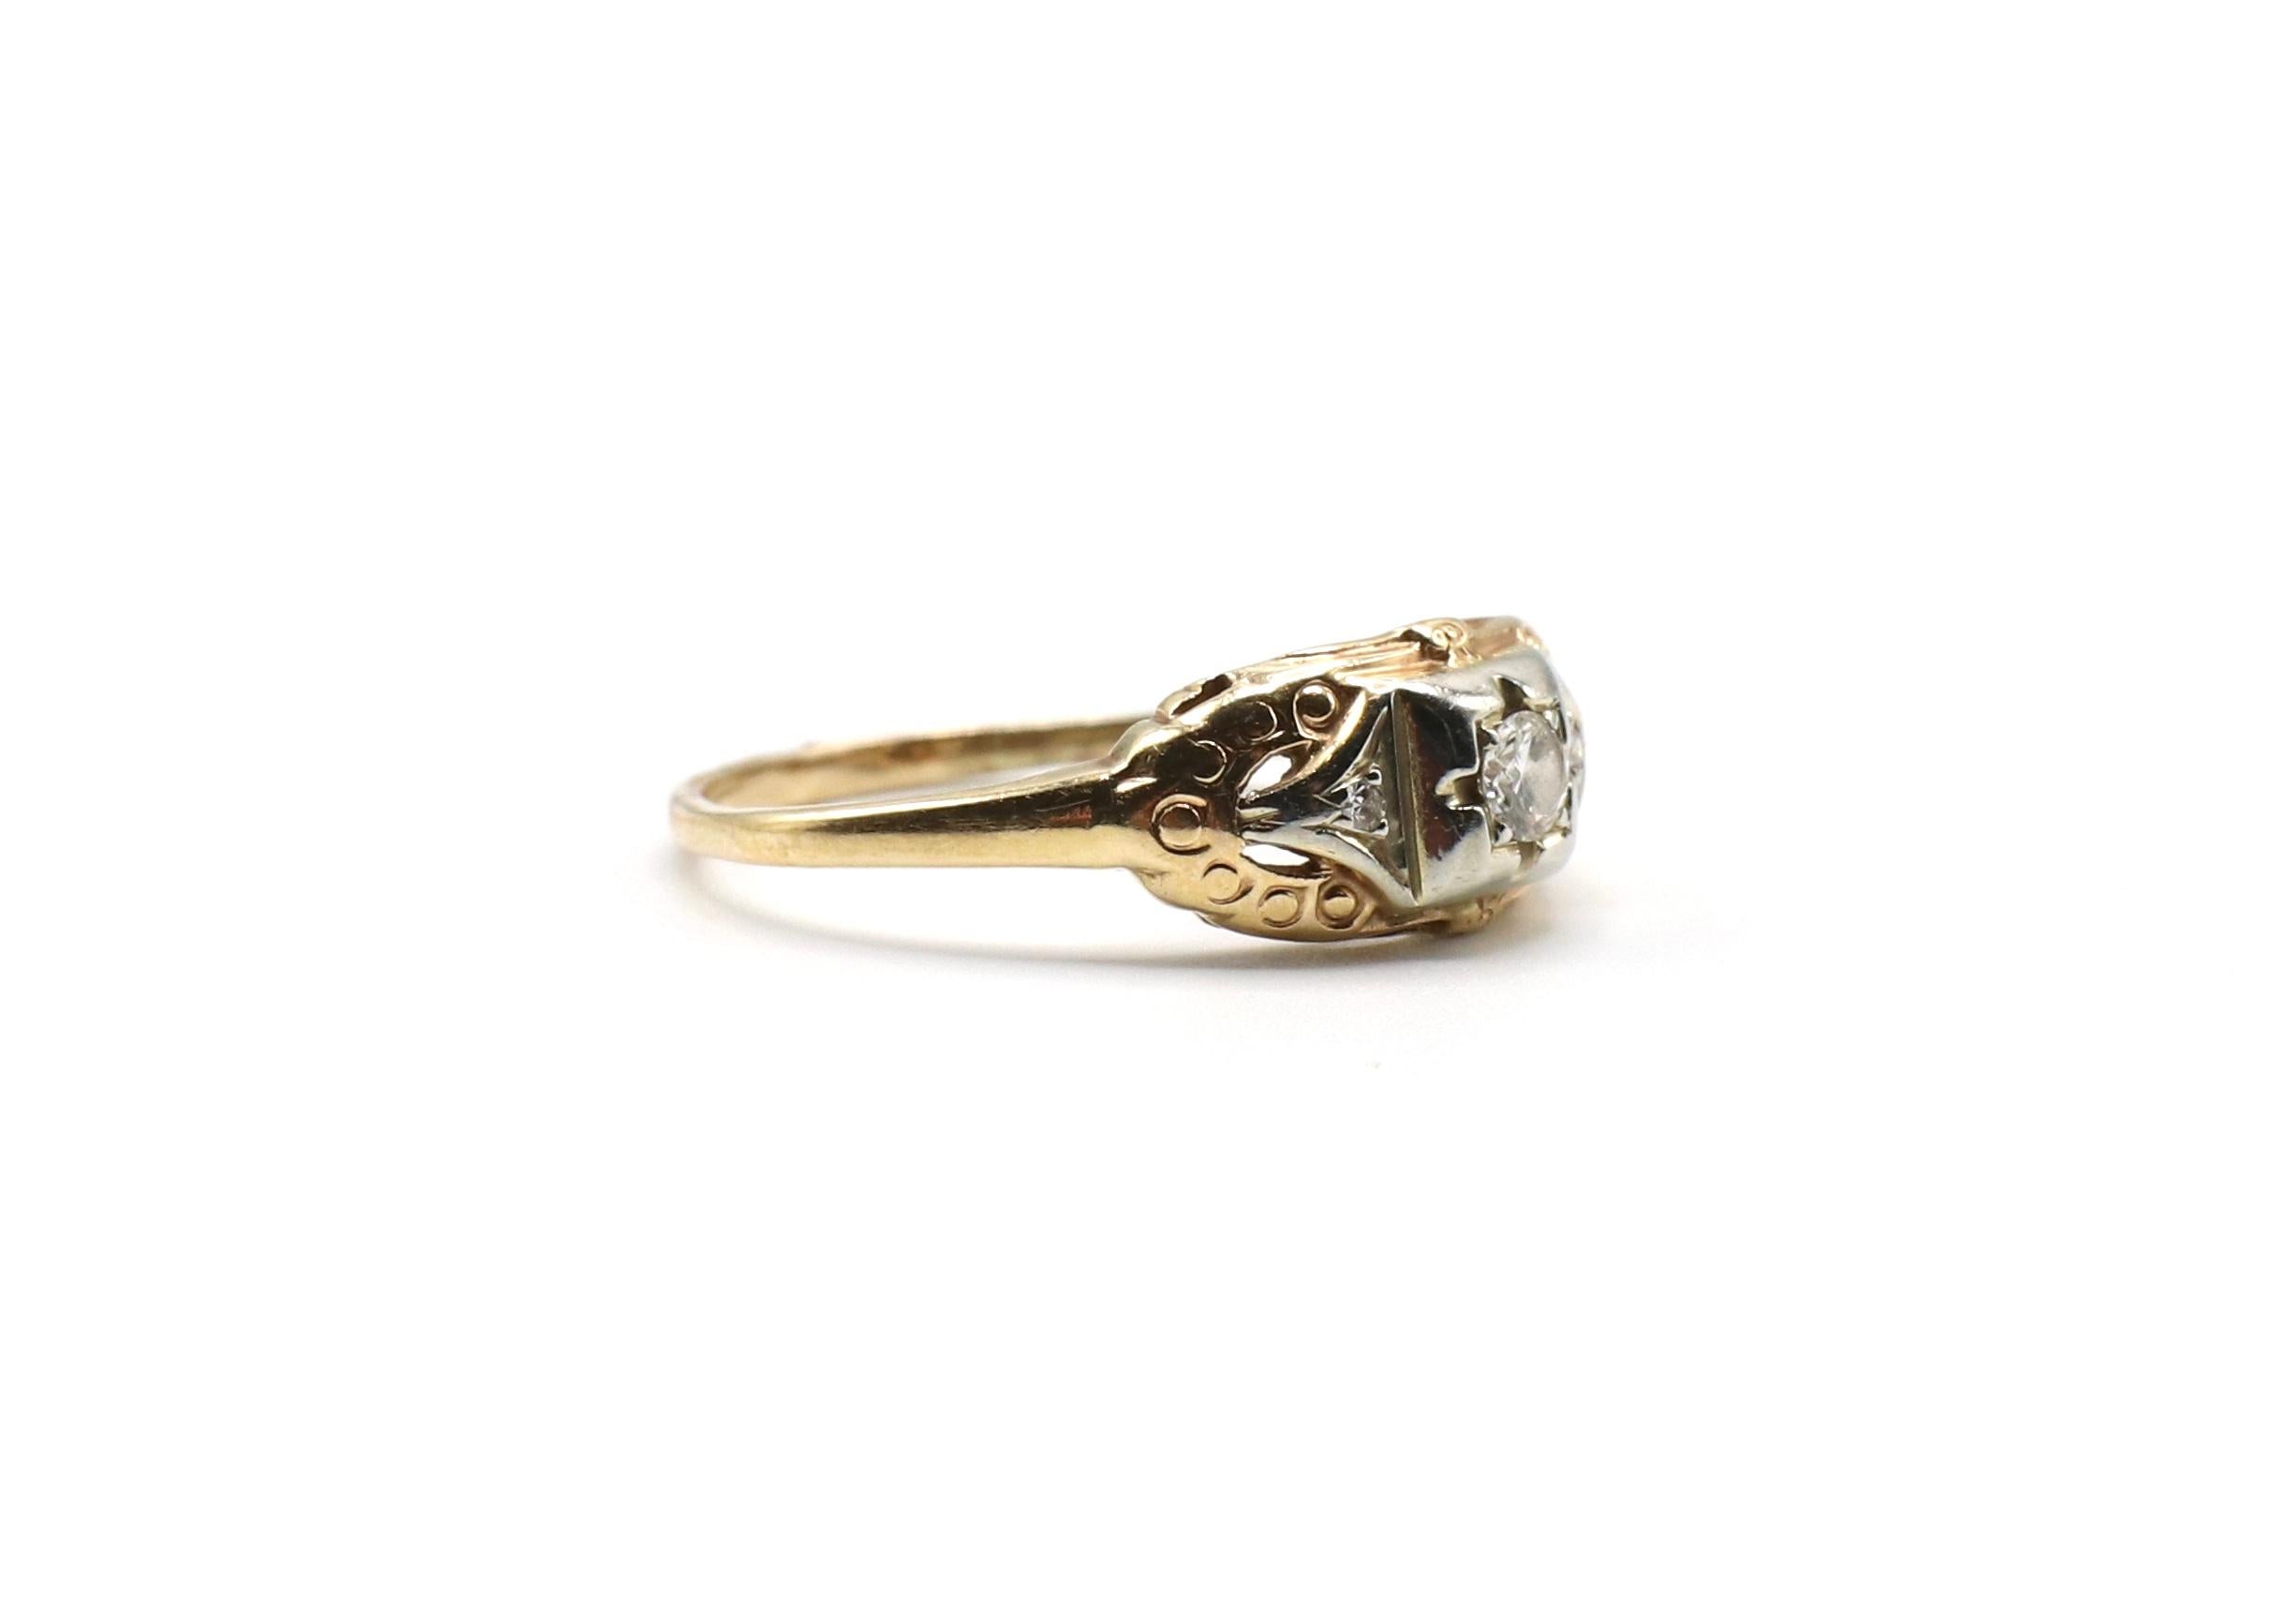 Jabel Diamond Cocktail Two-Tone Gold Engagement Ring

Metal: 14/18k yellow & white gold
Diamonds: 3 old European cut round diamonds, approx. .12 CTW G-H SI . The center diamond is approx. .10 cts
Size: 8
Signed: 